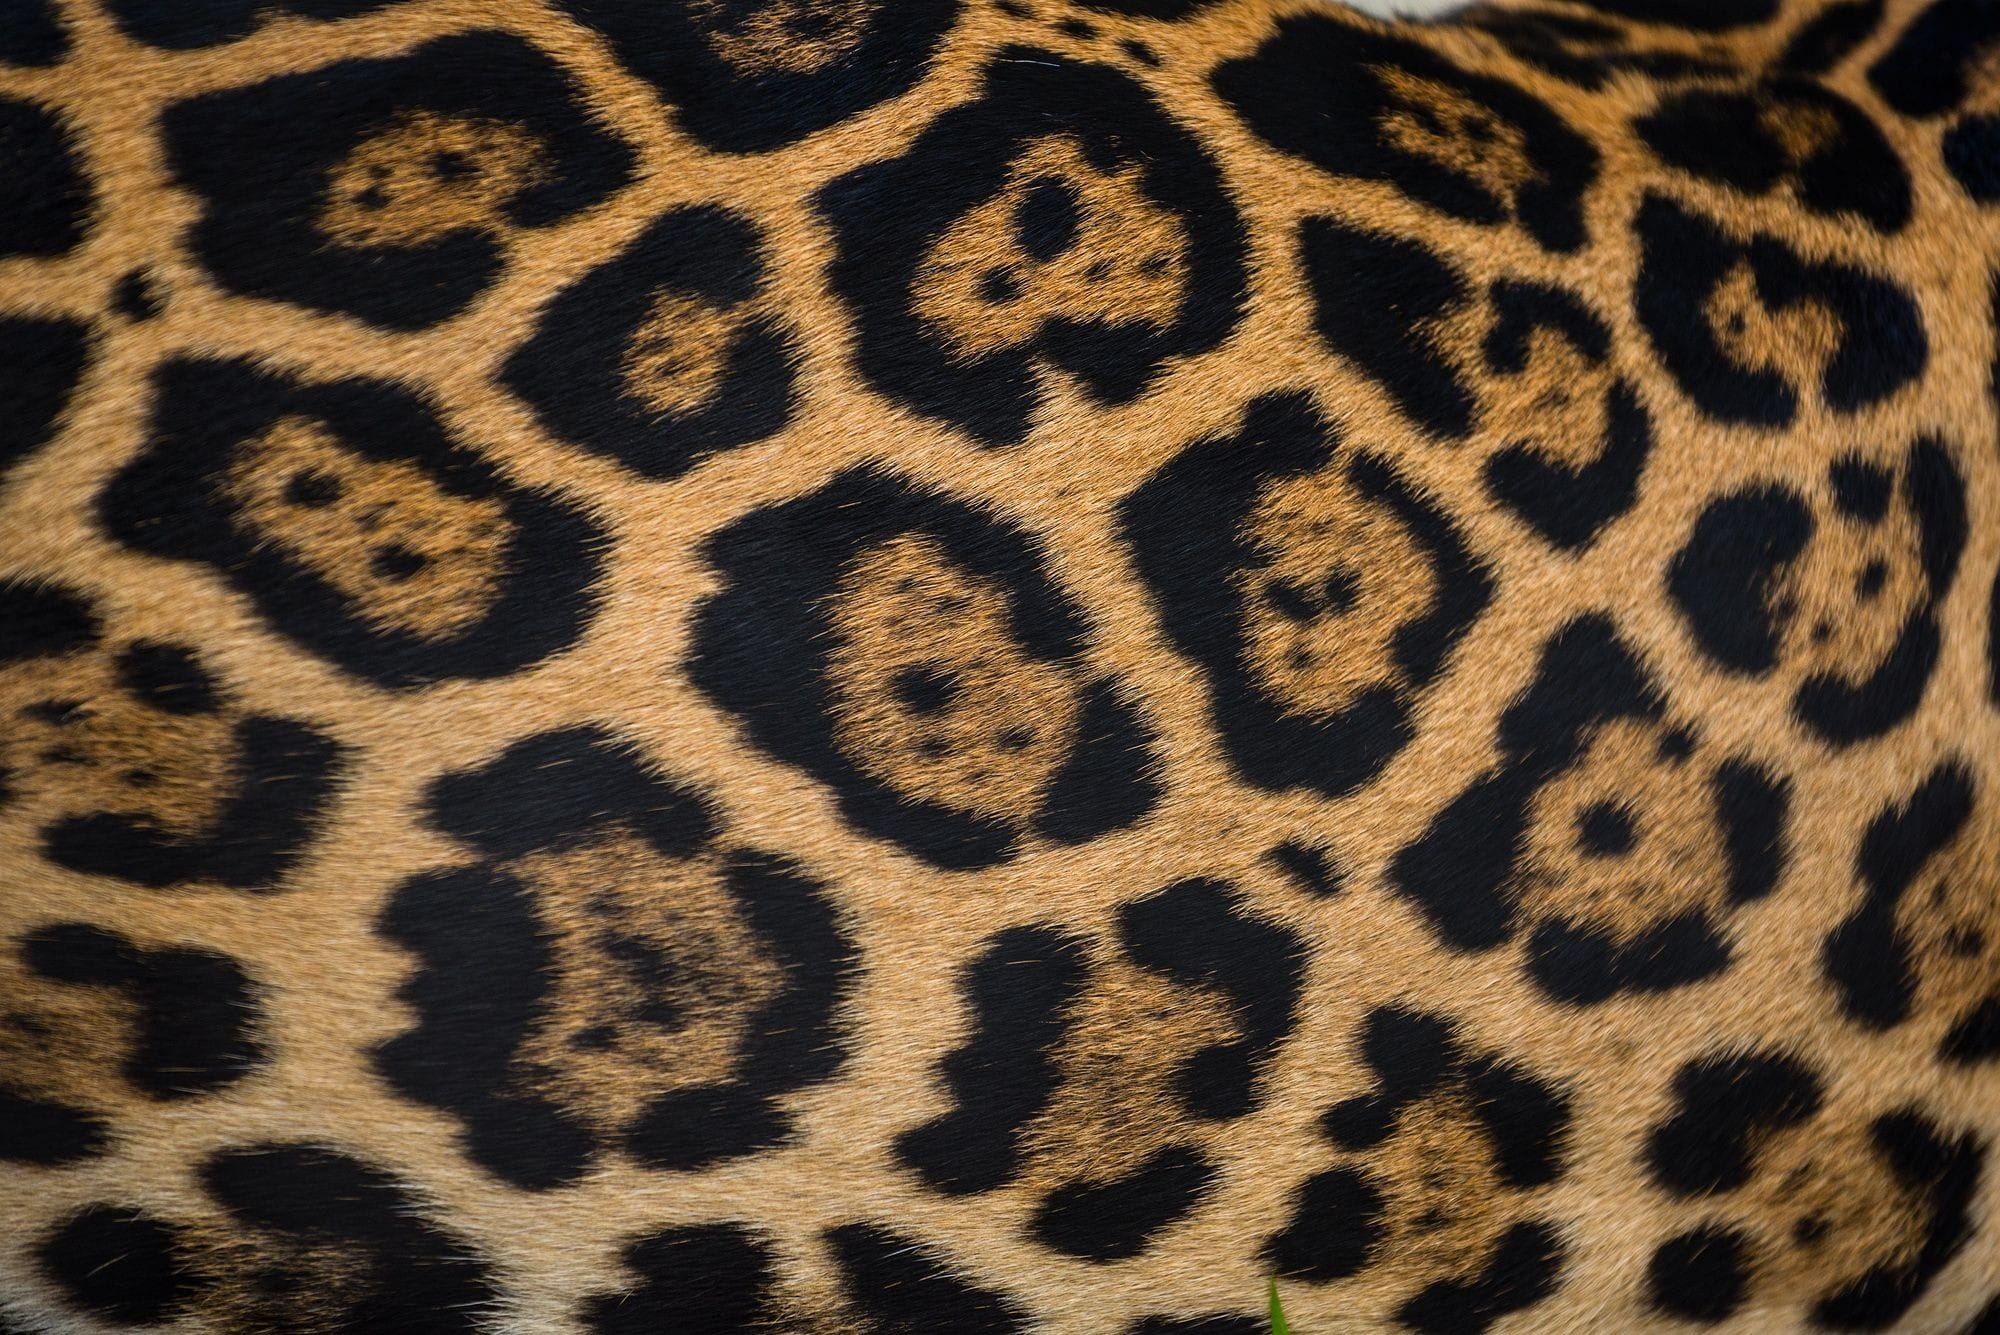 A close up of jaguar fur. Jaguars have rosettes on their fur. A rosette is a circle with a dot in the middle.